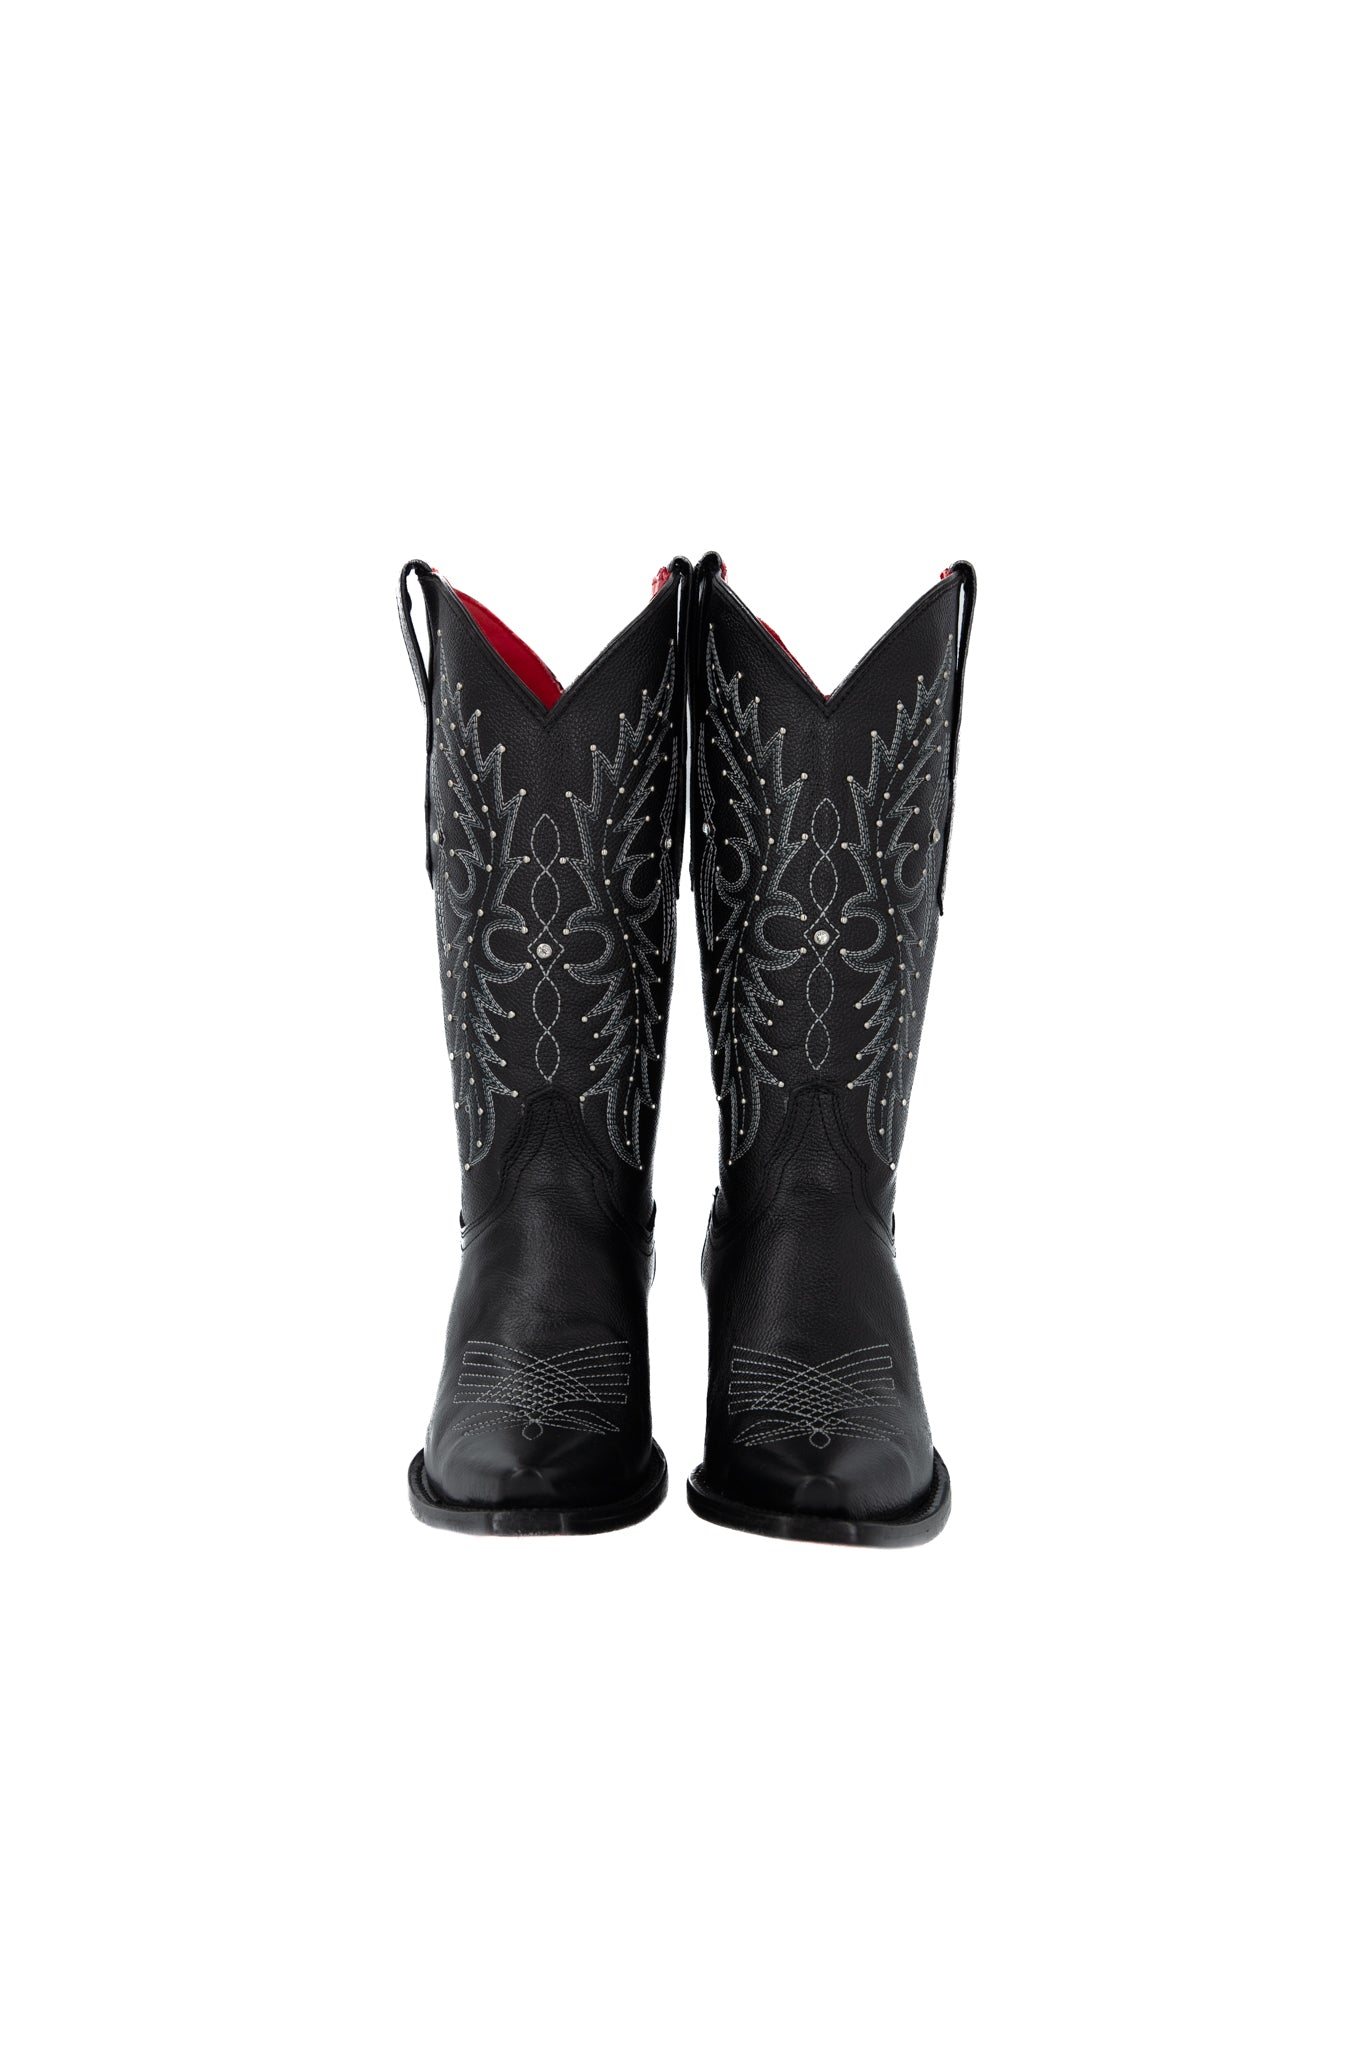 The Ruby Ebano Red Sole Square Toe Boot